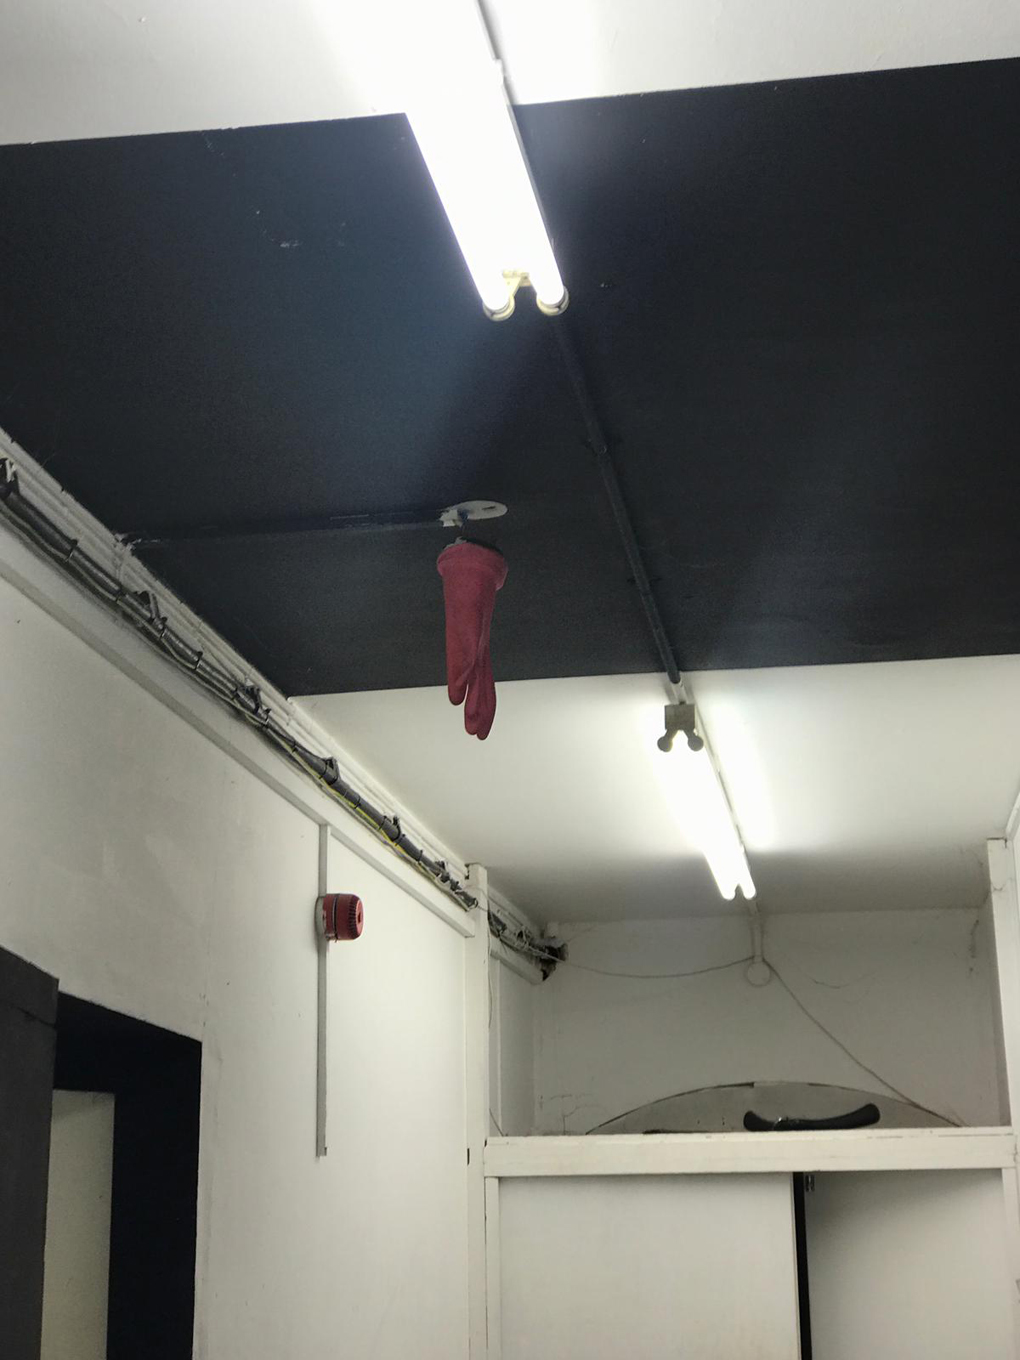 glove over a fire extinguisher in the roof